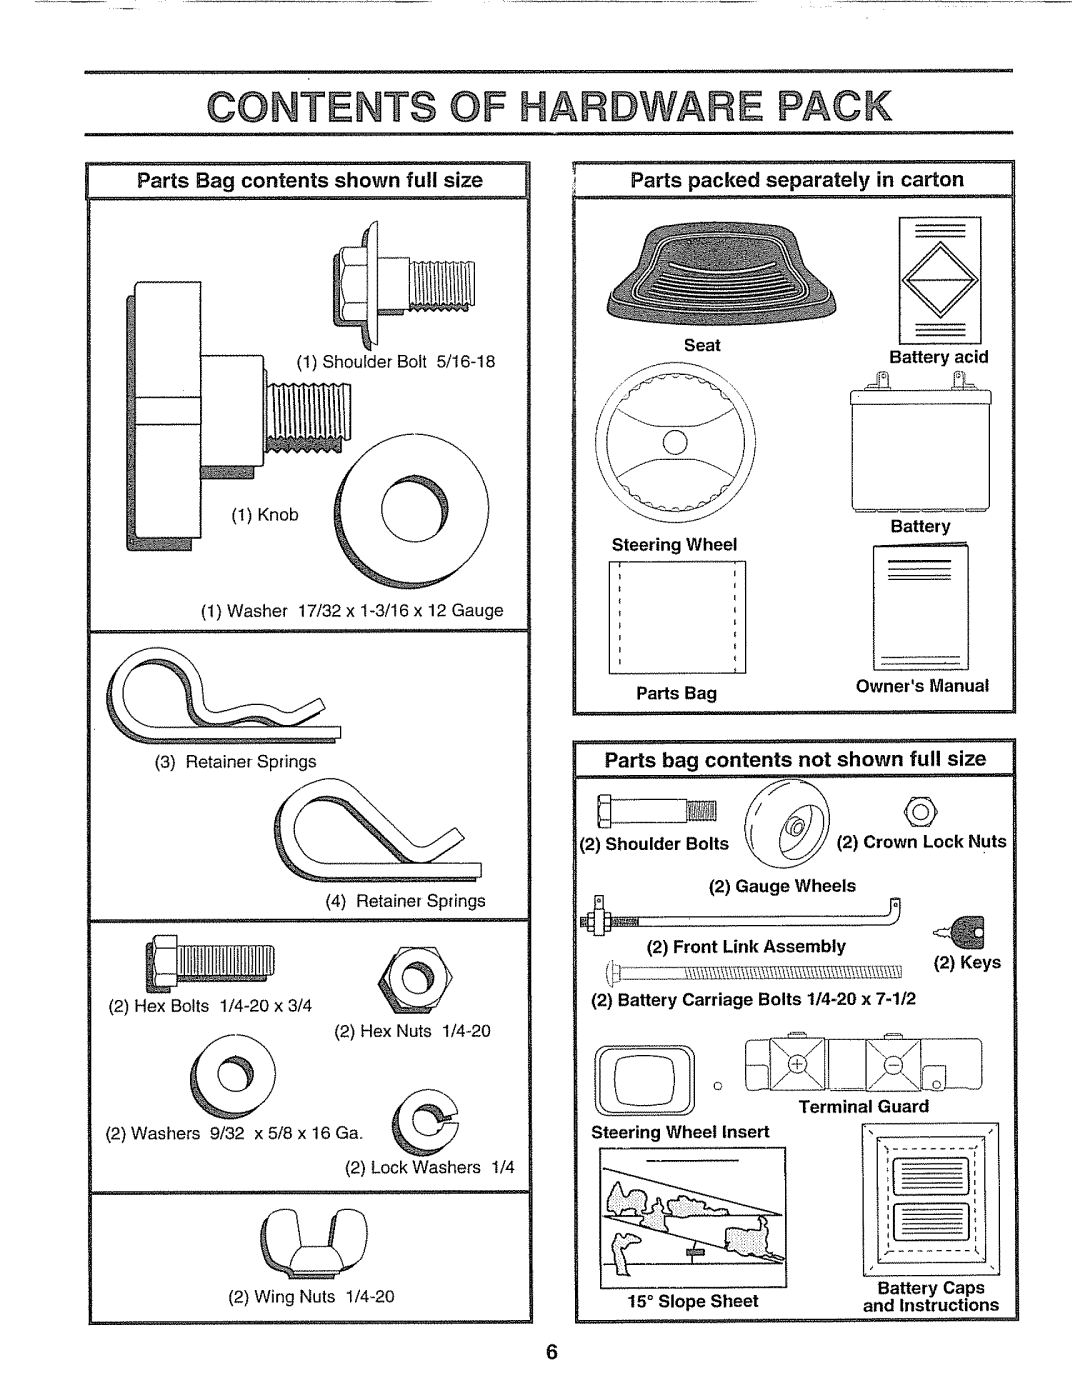 Sears 917.25597 Contents Of Hardware Pack, Parts Bag contents shown full size, Parts packed separately in carton, Seat 